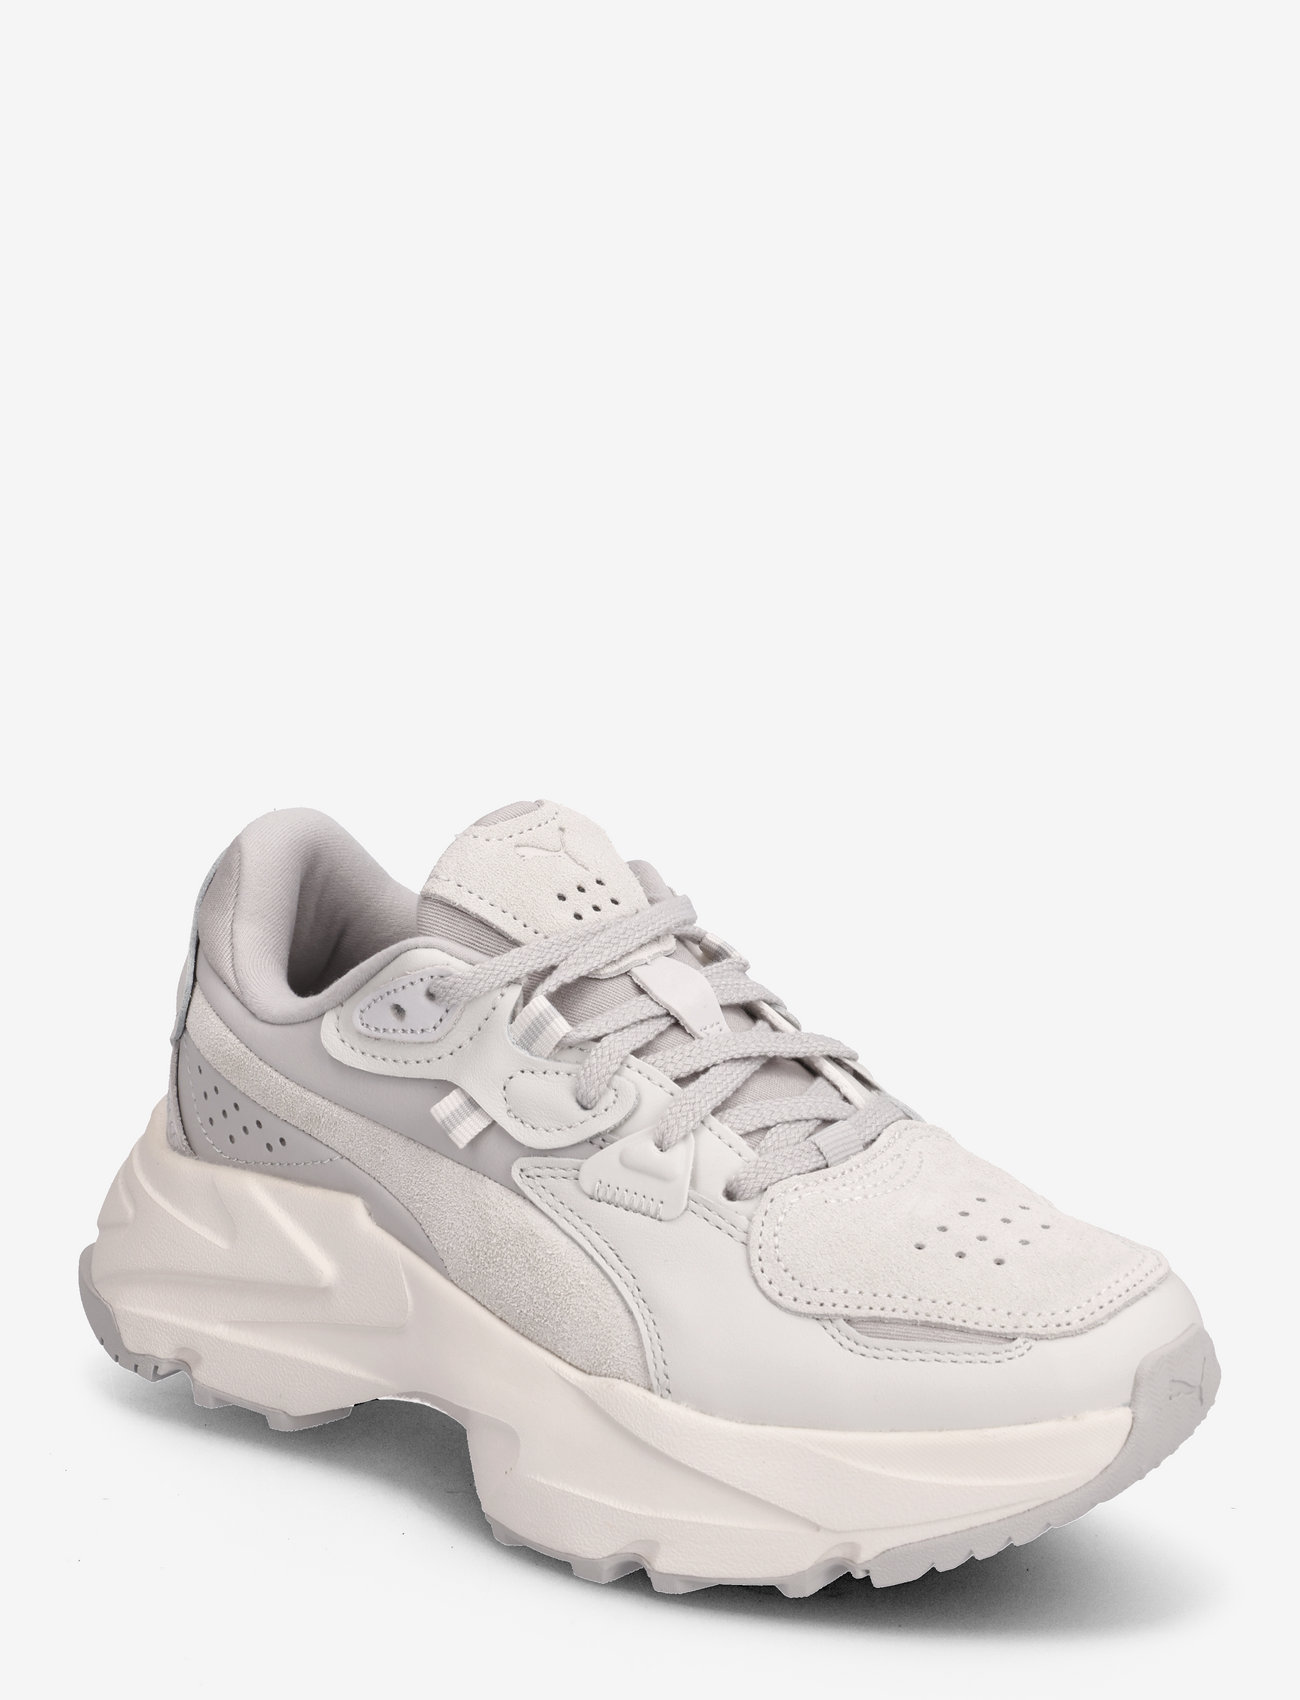 PUMA - Orkid Selflove Wns - shoes - ash gray-sedate gray - 0